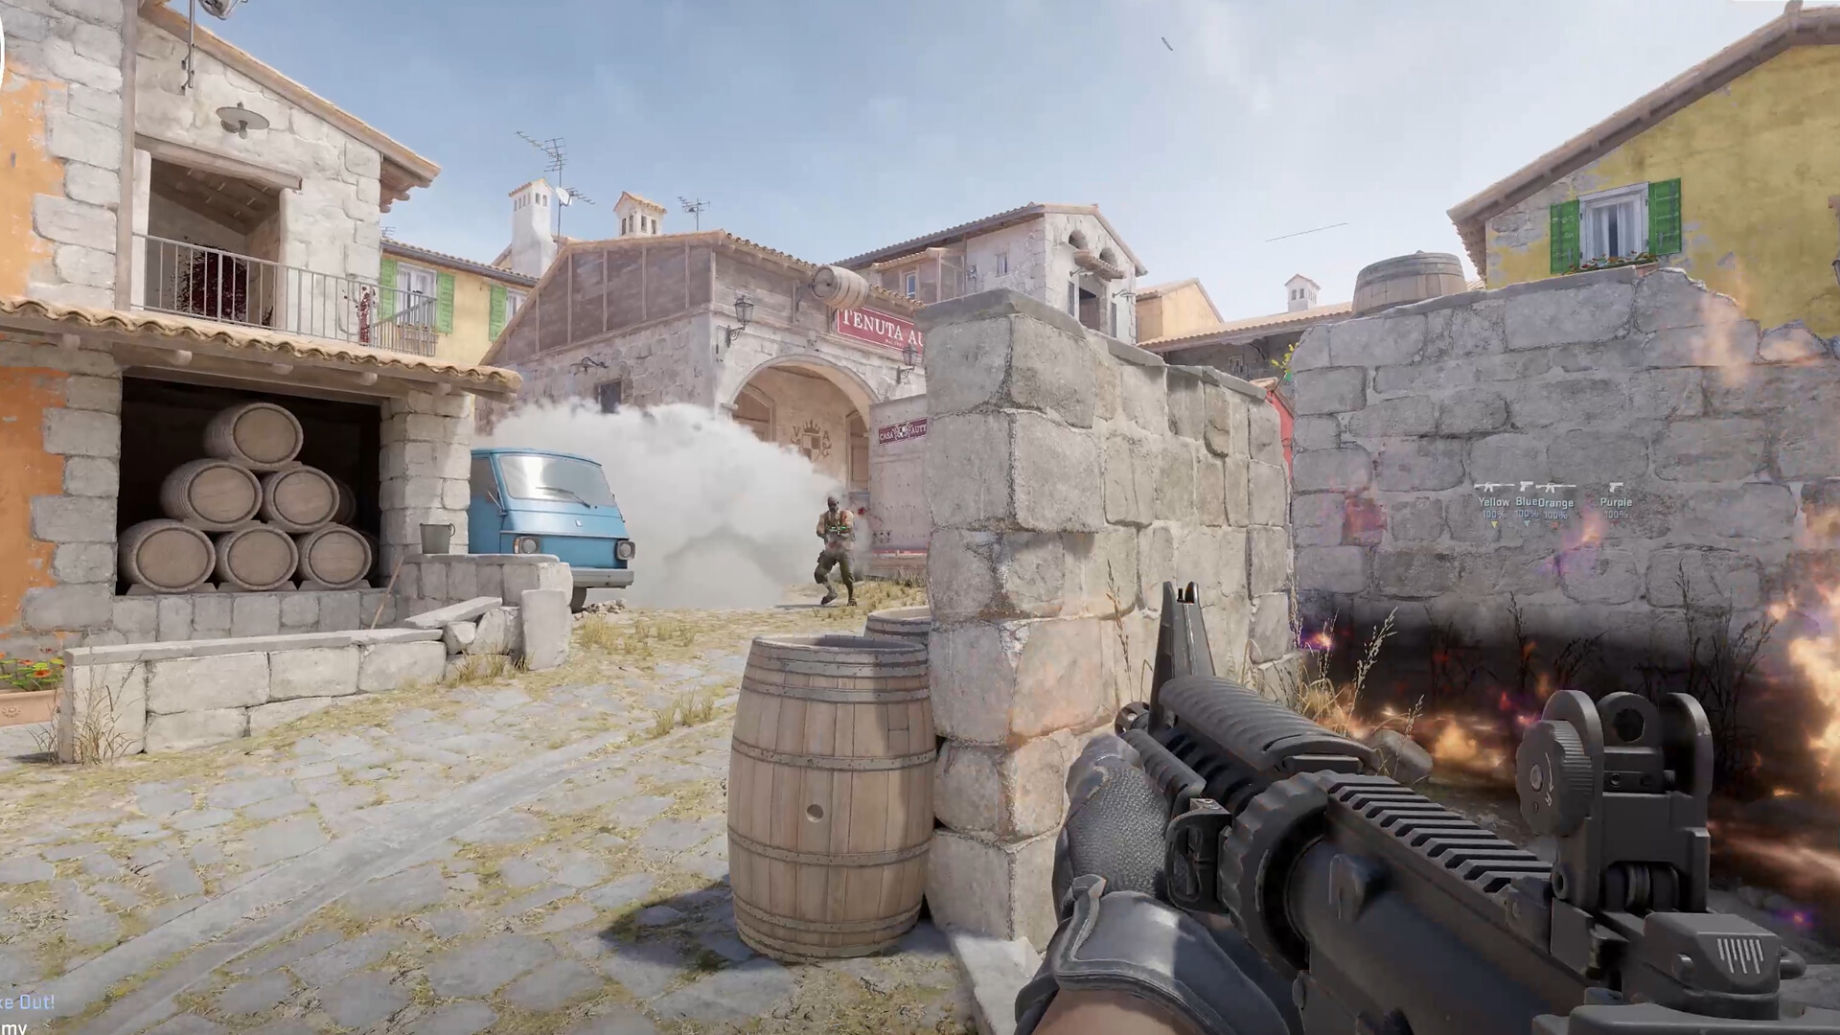 CS:GO 2 Release Date & Gameplay » Counter-Strike Warzone